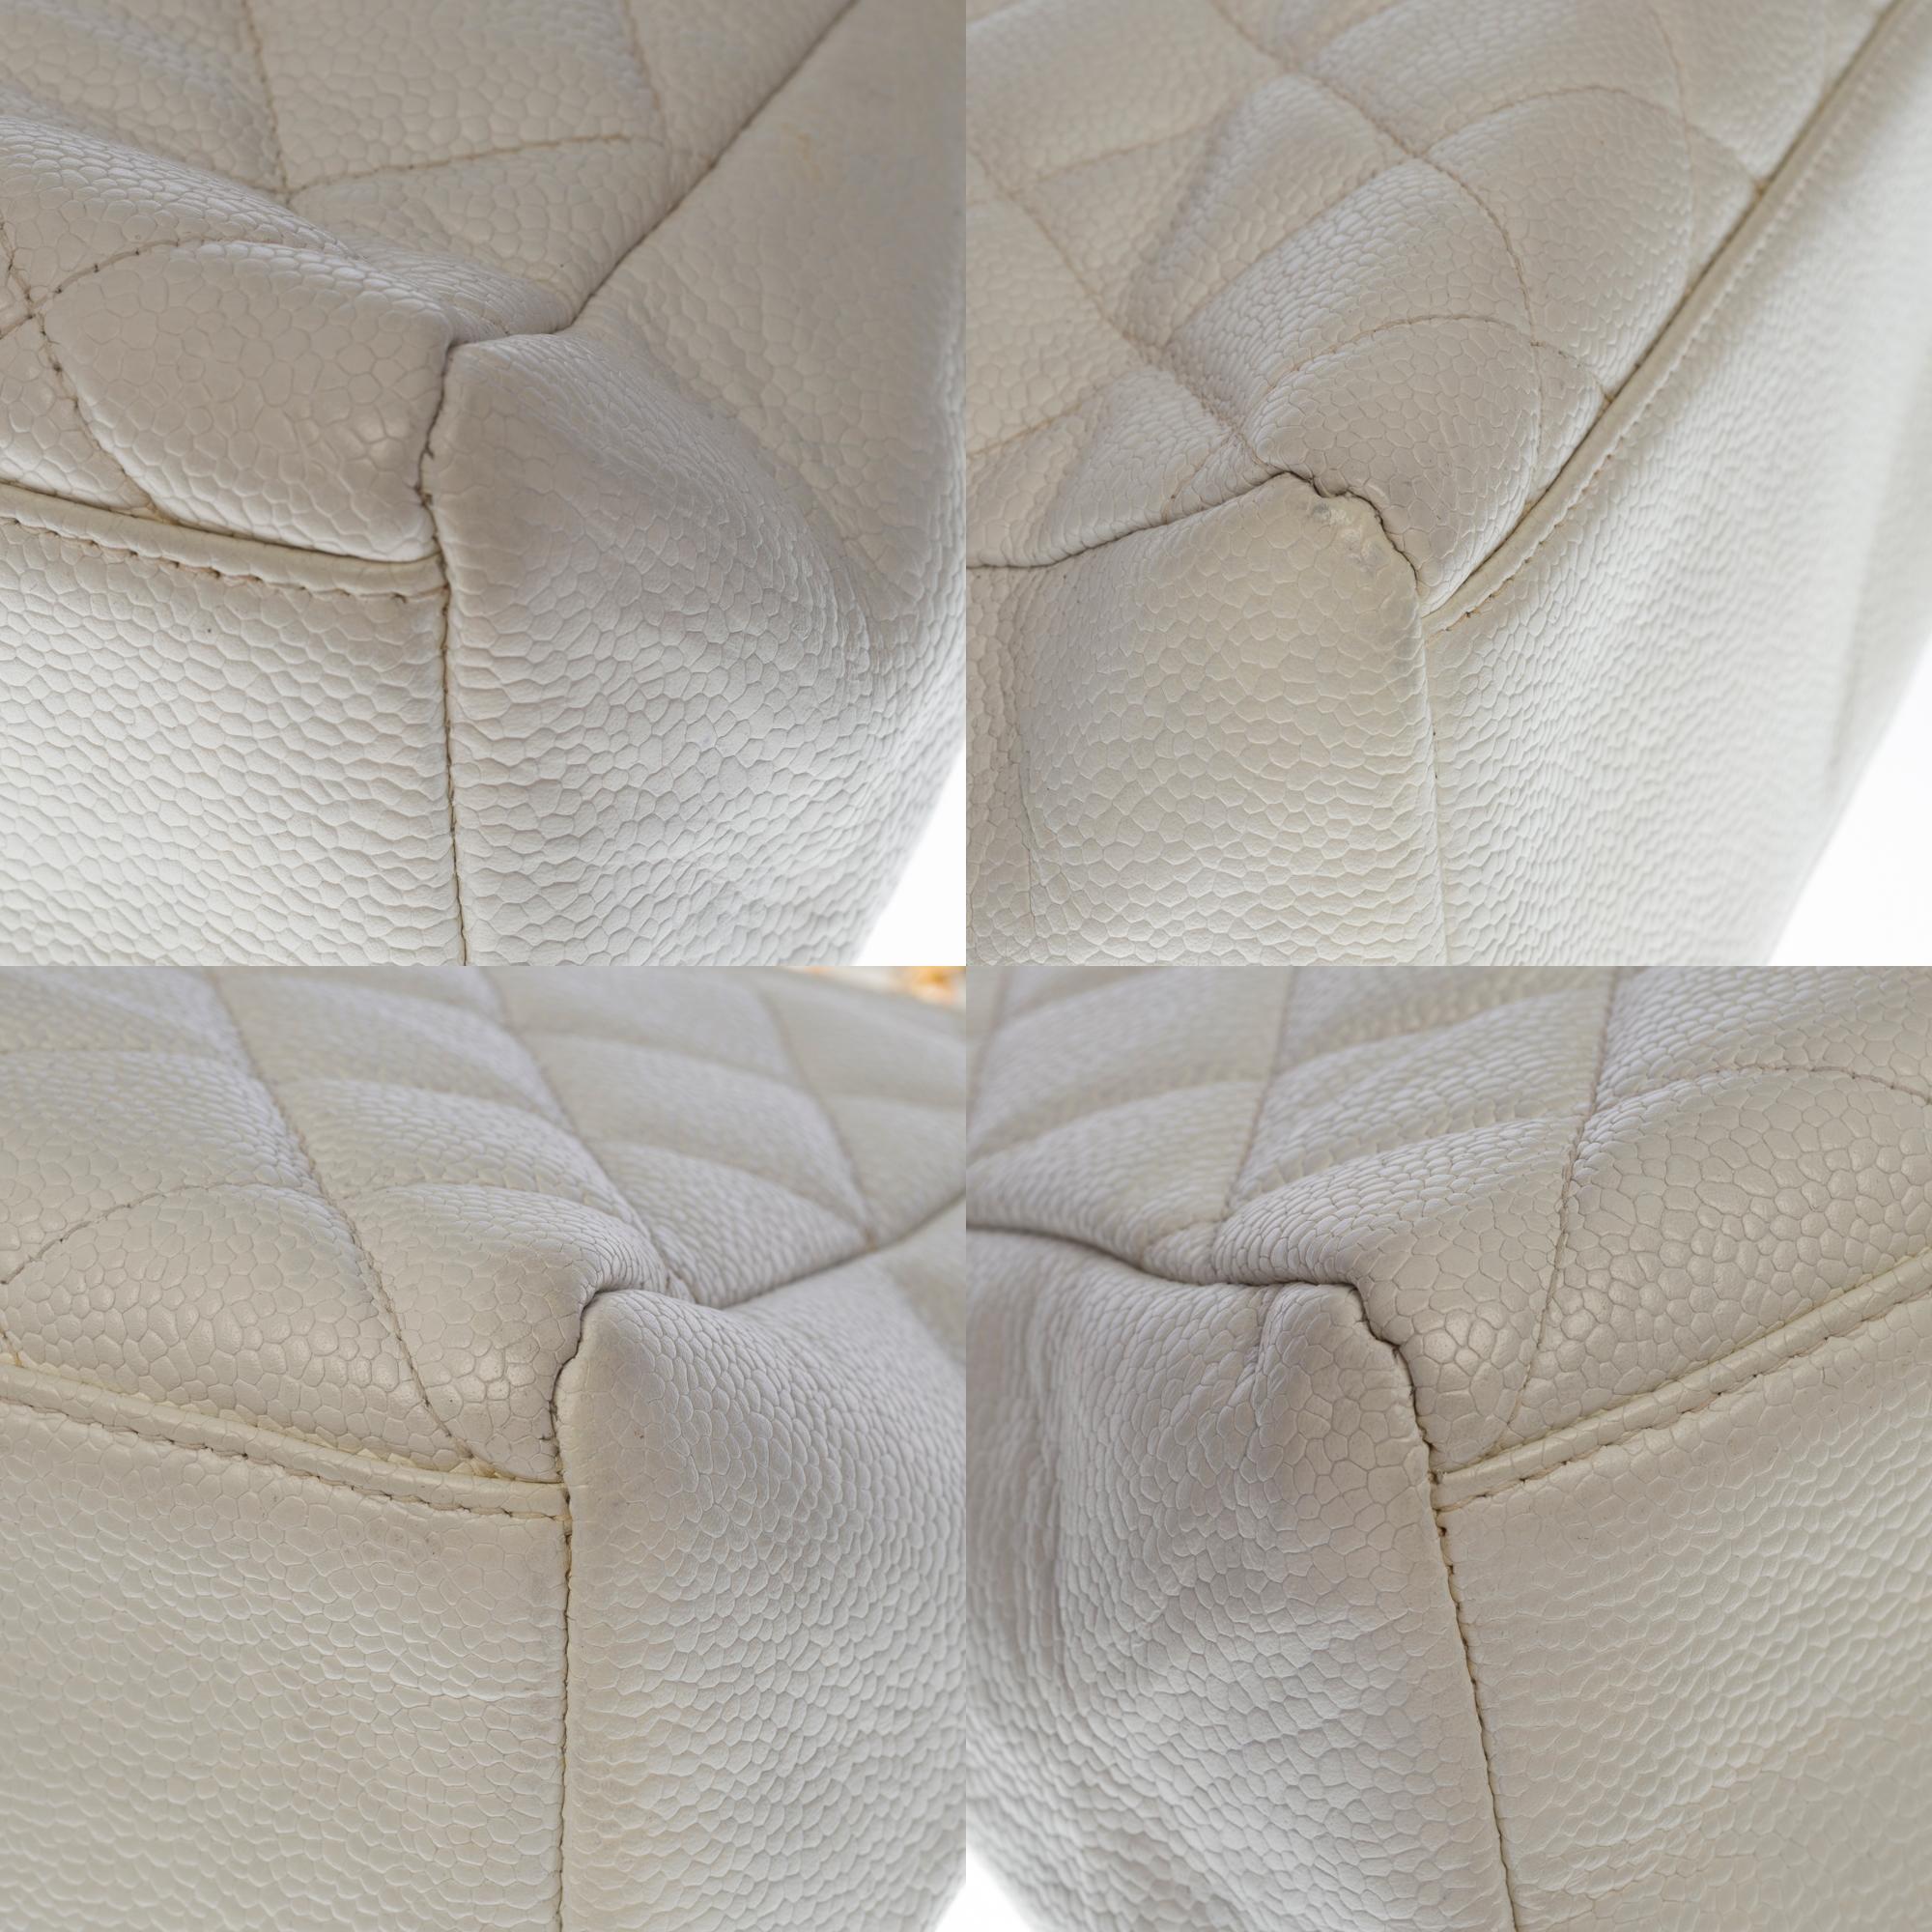 Stunning Chanel Classic shoulder bag in white caviar quilted leather, GHW 5